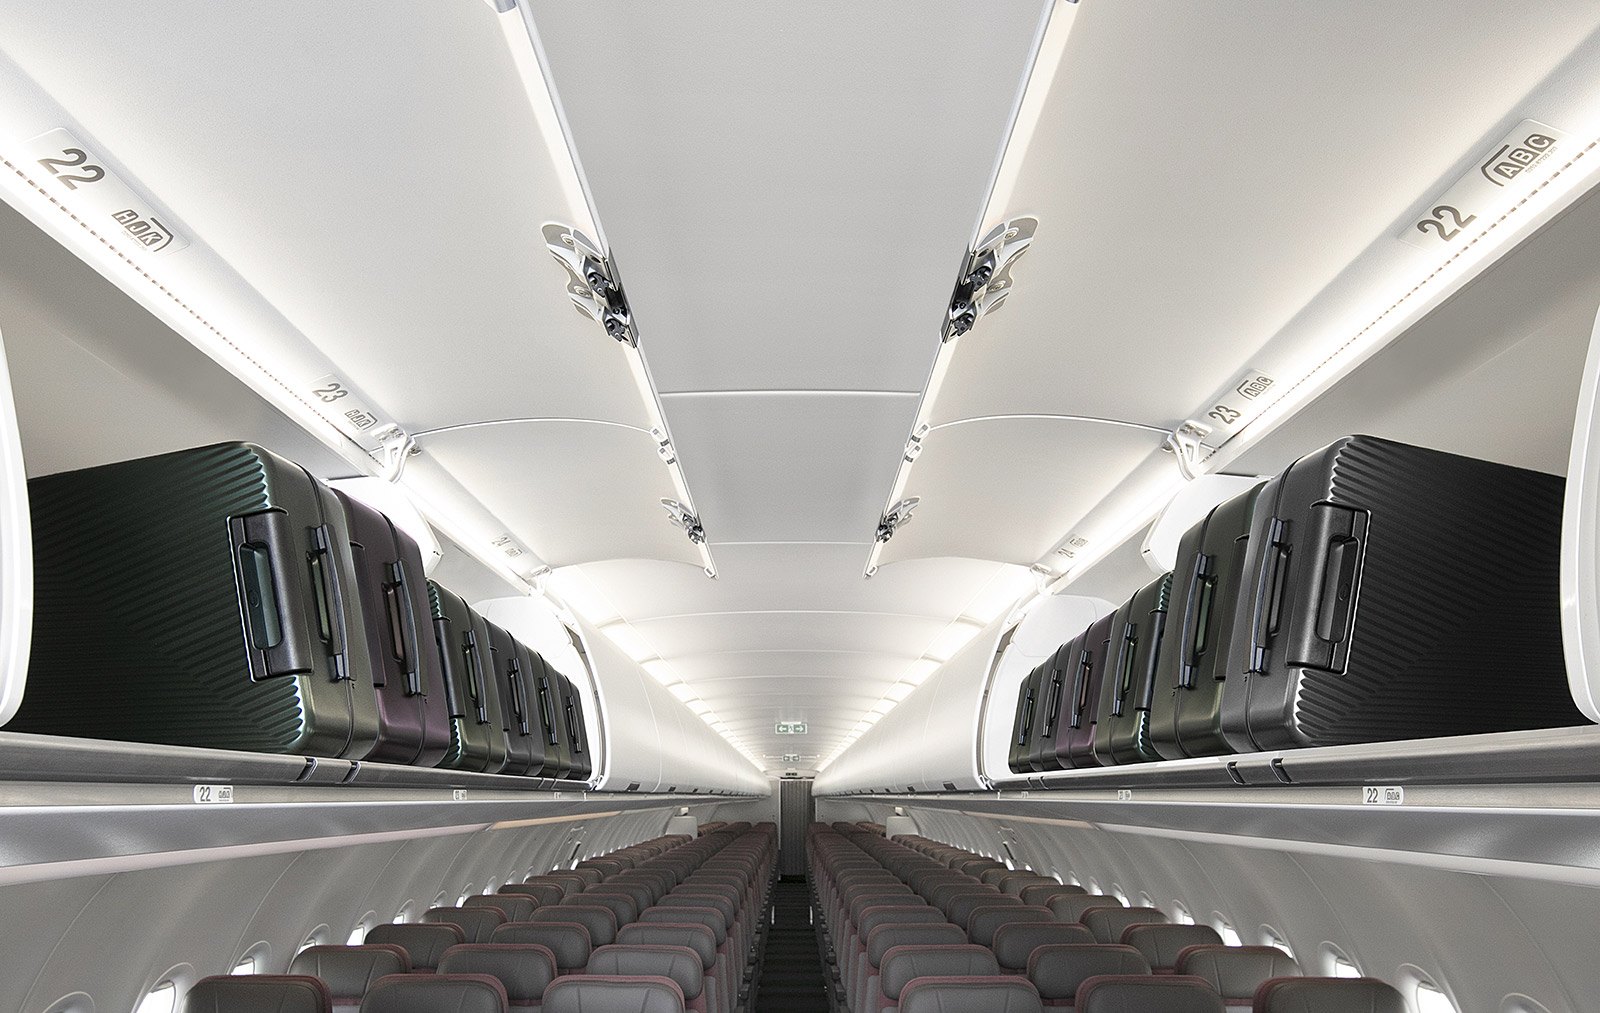 There is a sense of space across the cabin of A321neo